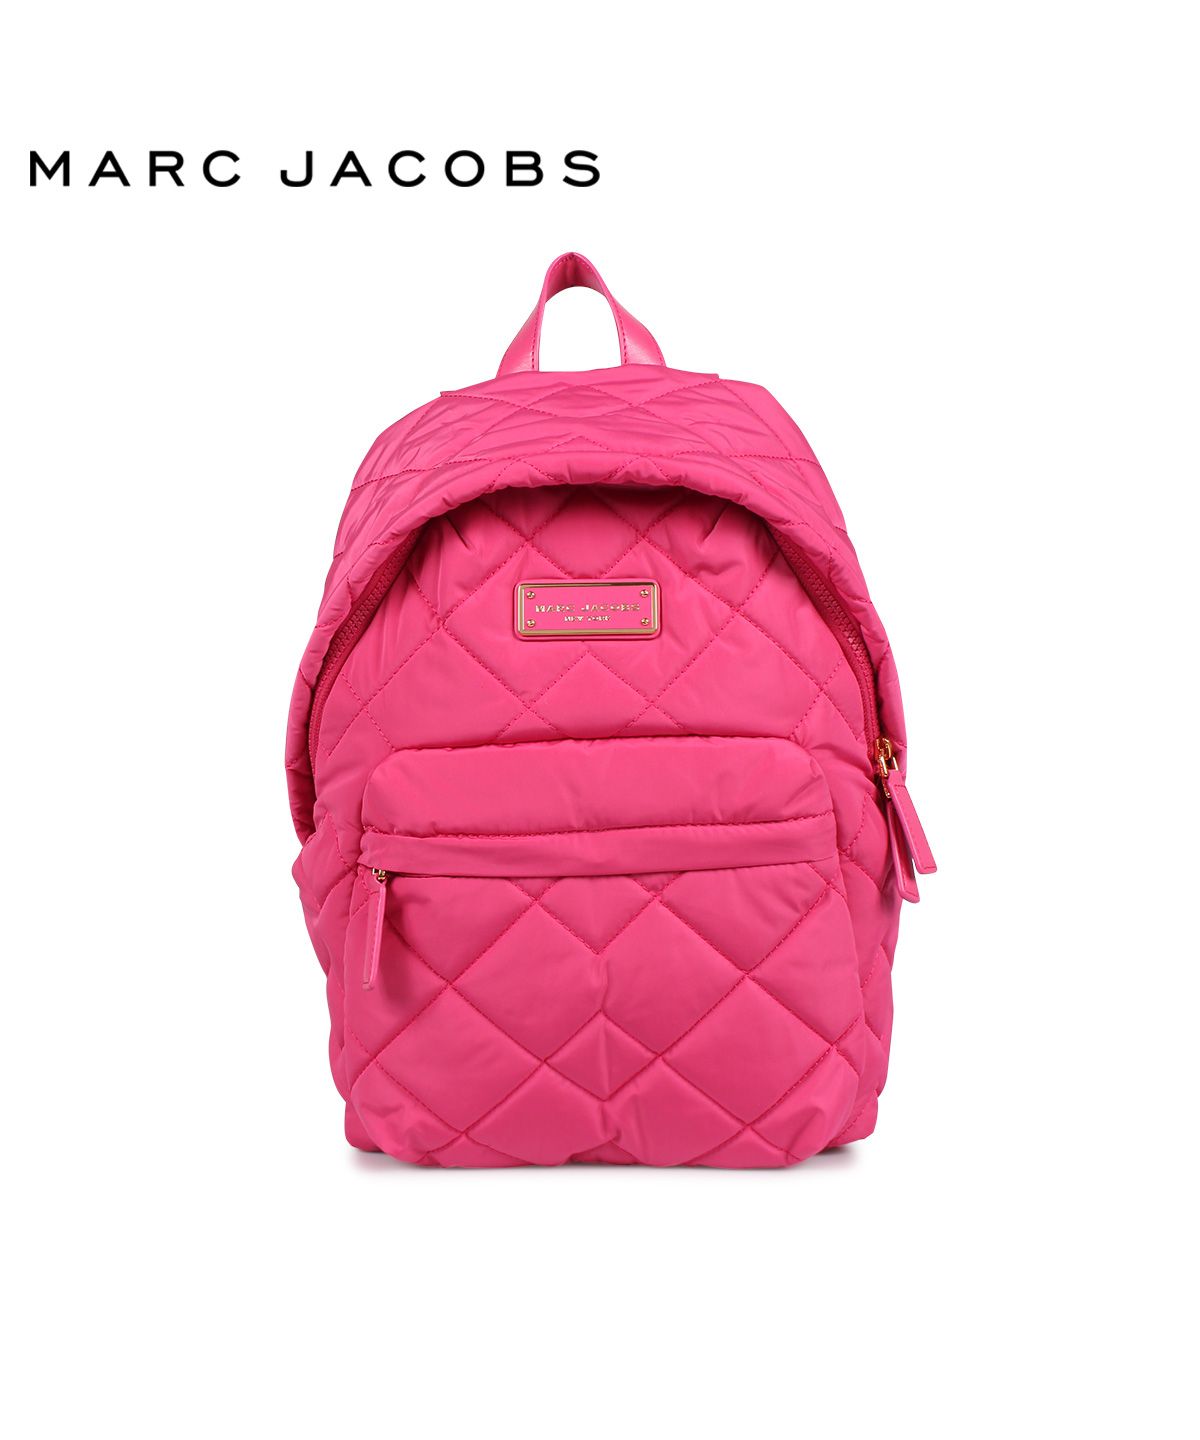 MARC JACOBS「マークジェイコブス』リュックサック M0011321